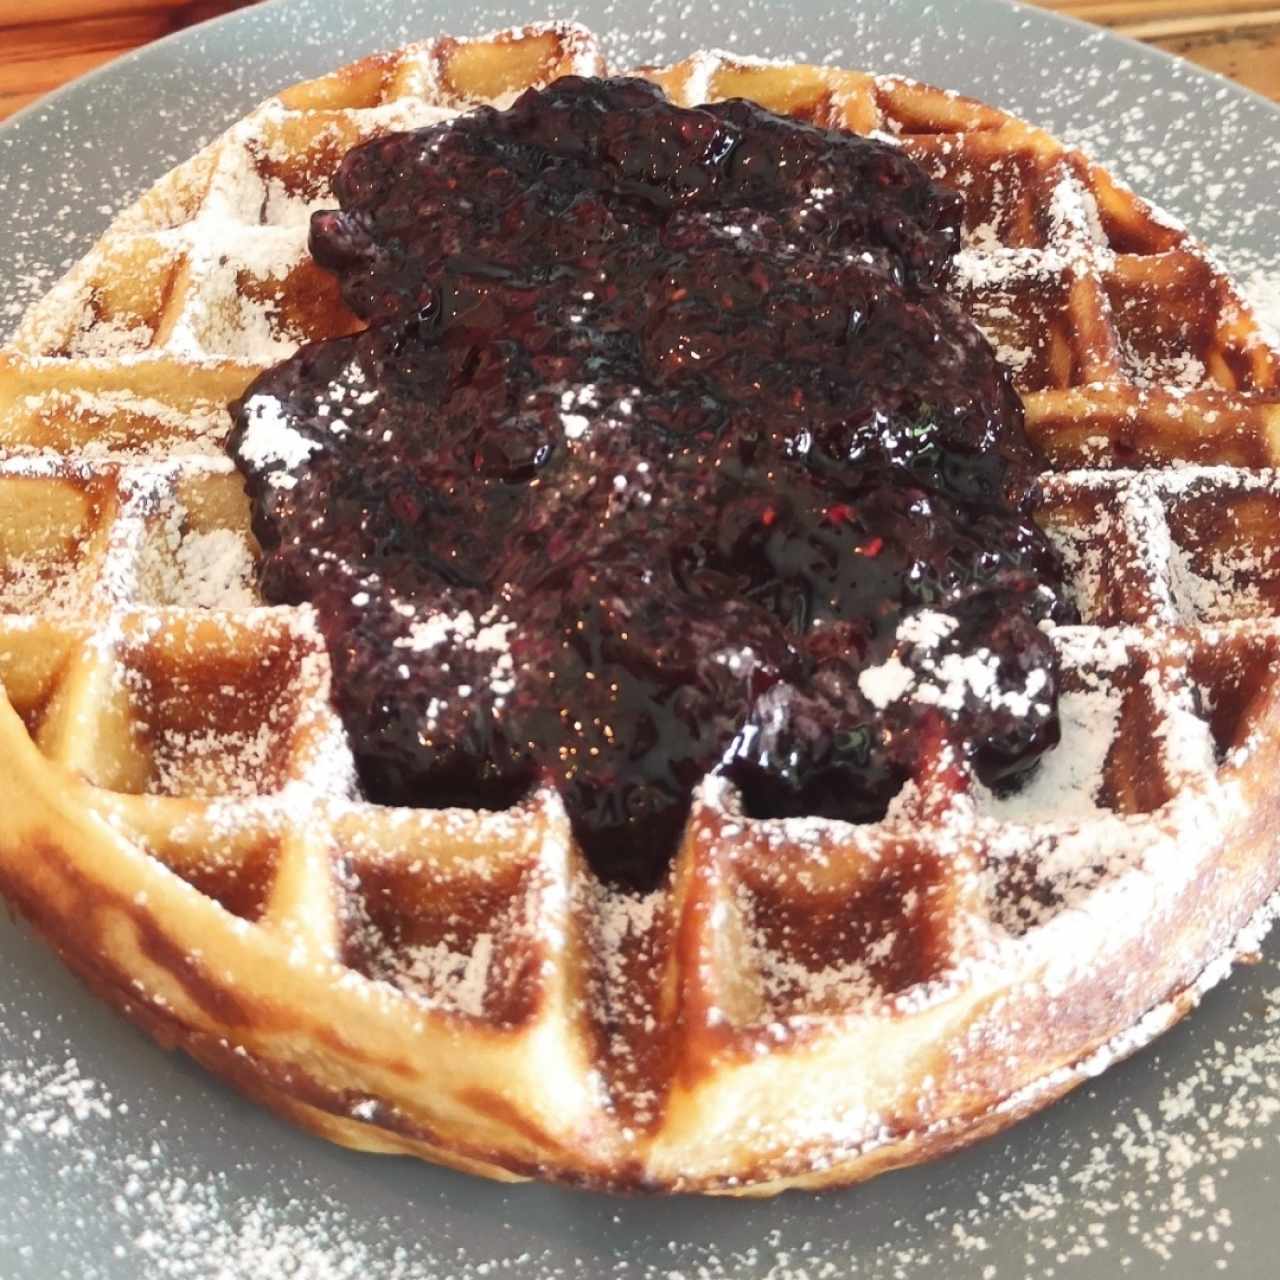 WAffles CON BLUEBERRIES